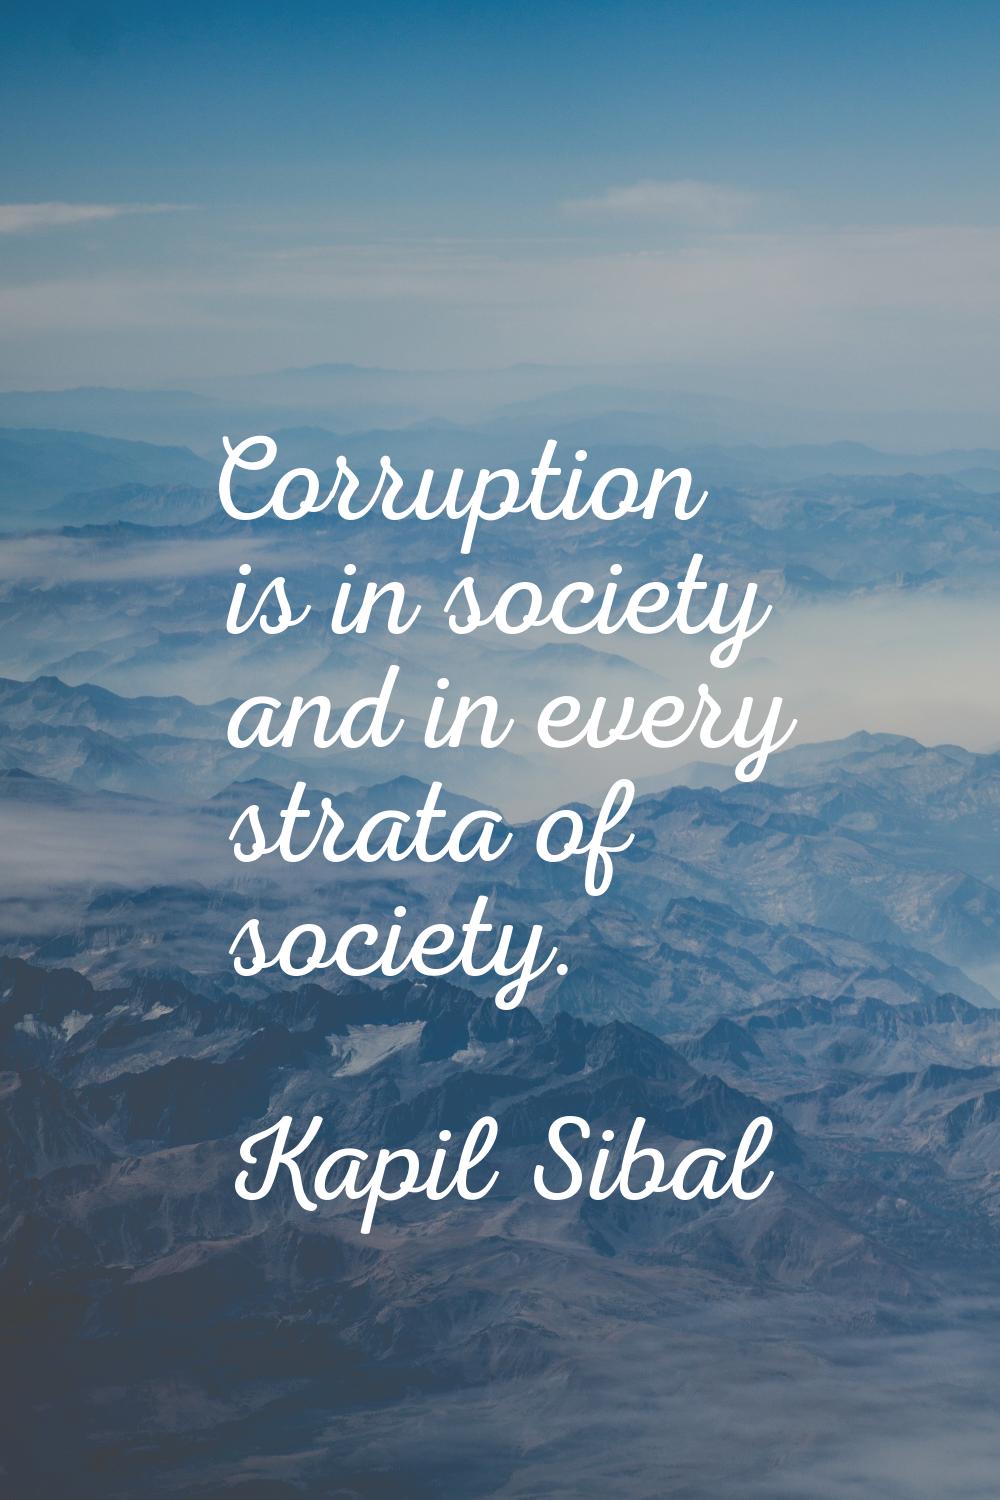 Corruption is in society and in every strata of society.